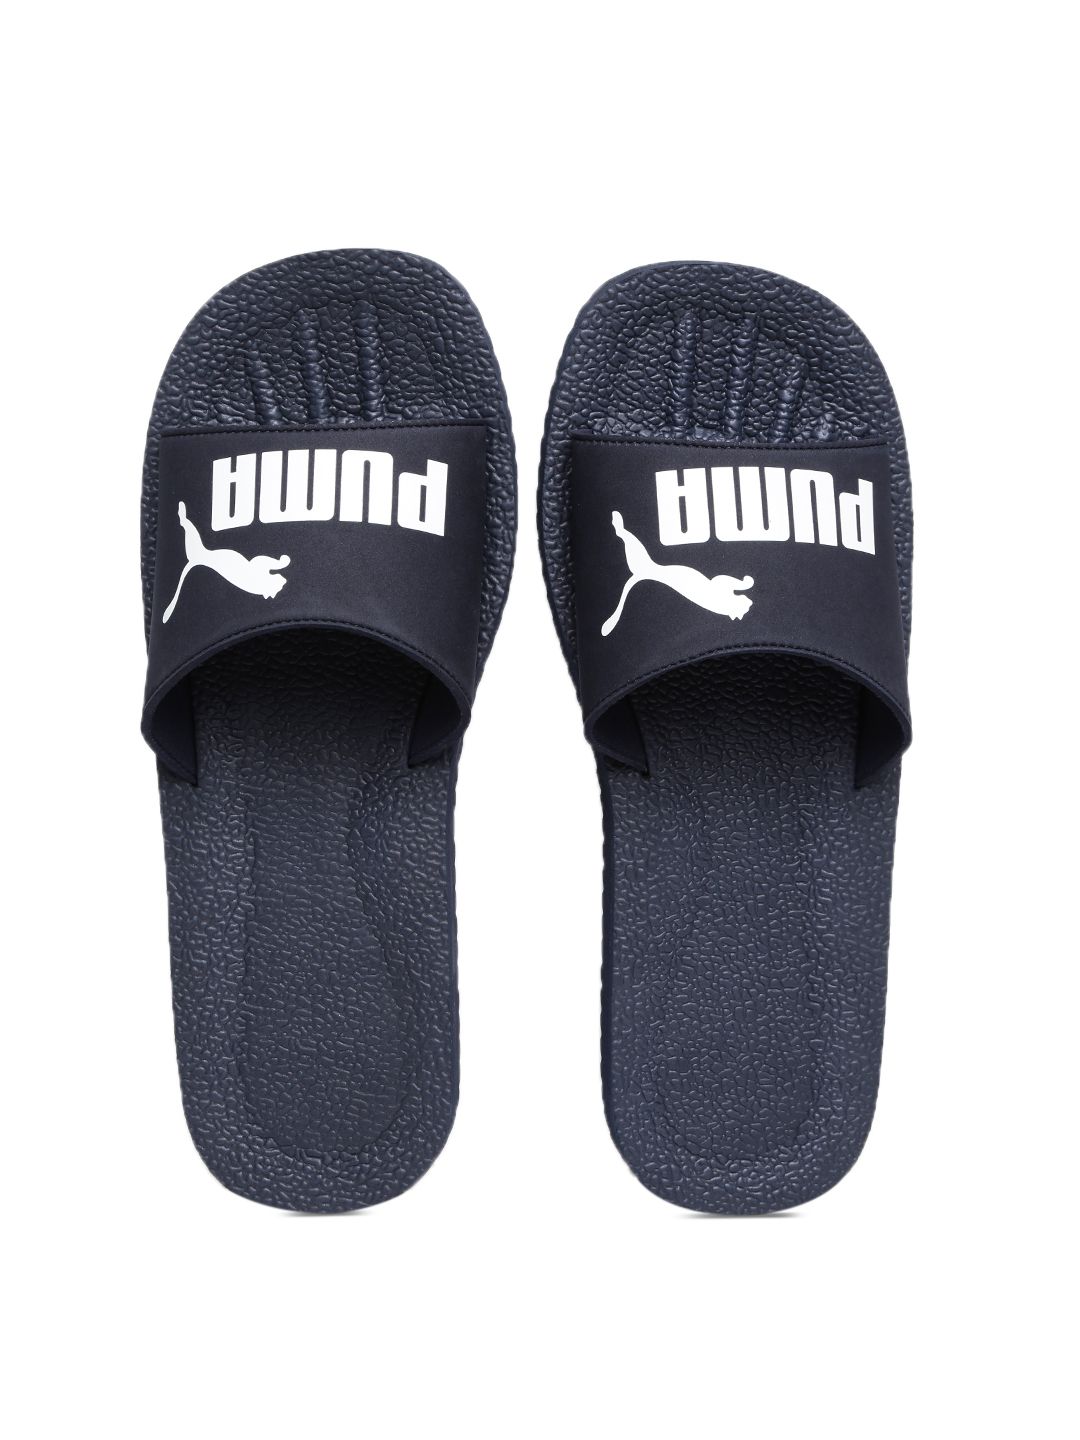 how much is the puma slippers